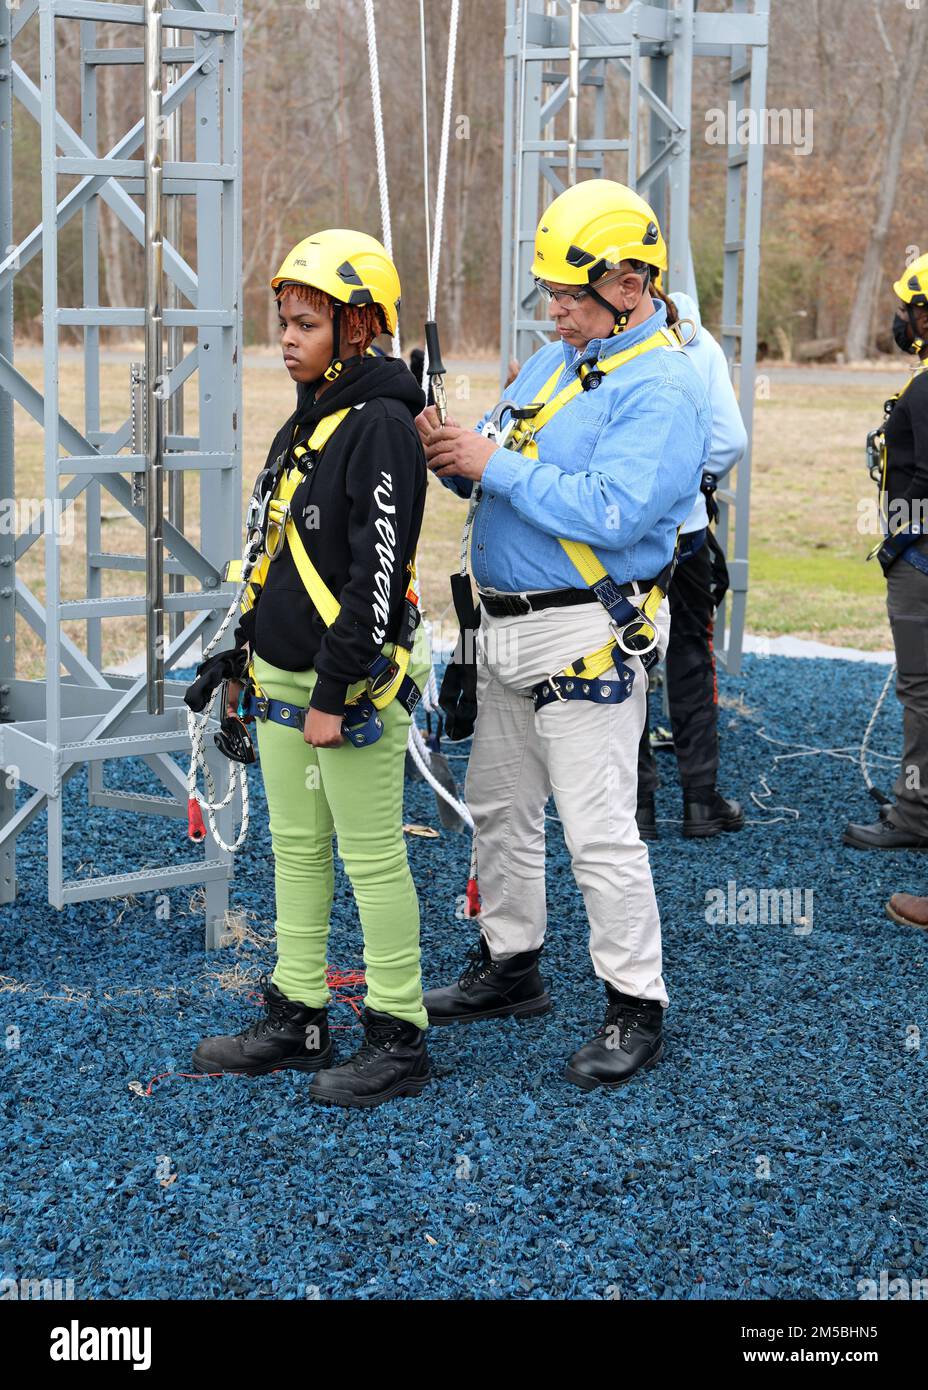 220222-N-OH262-0430--FORT EUSTIS, Va. (February 22, 2022)-- Newly hired Civil Service Mariners (CIVMAR) demonstrates the proper use of safety gear to transit aloft aboard a ship; while they were attending Basic Training at Military Sealift Command Training Center East on Joint Base Langley-Fort Eustis, Virginia, Feb. 22. The training was part of the MSC Fall Protection curriculum, which must be successfully completed prior to sailing in MSC's fleet of ships. Stock Photo